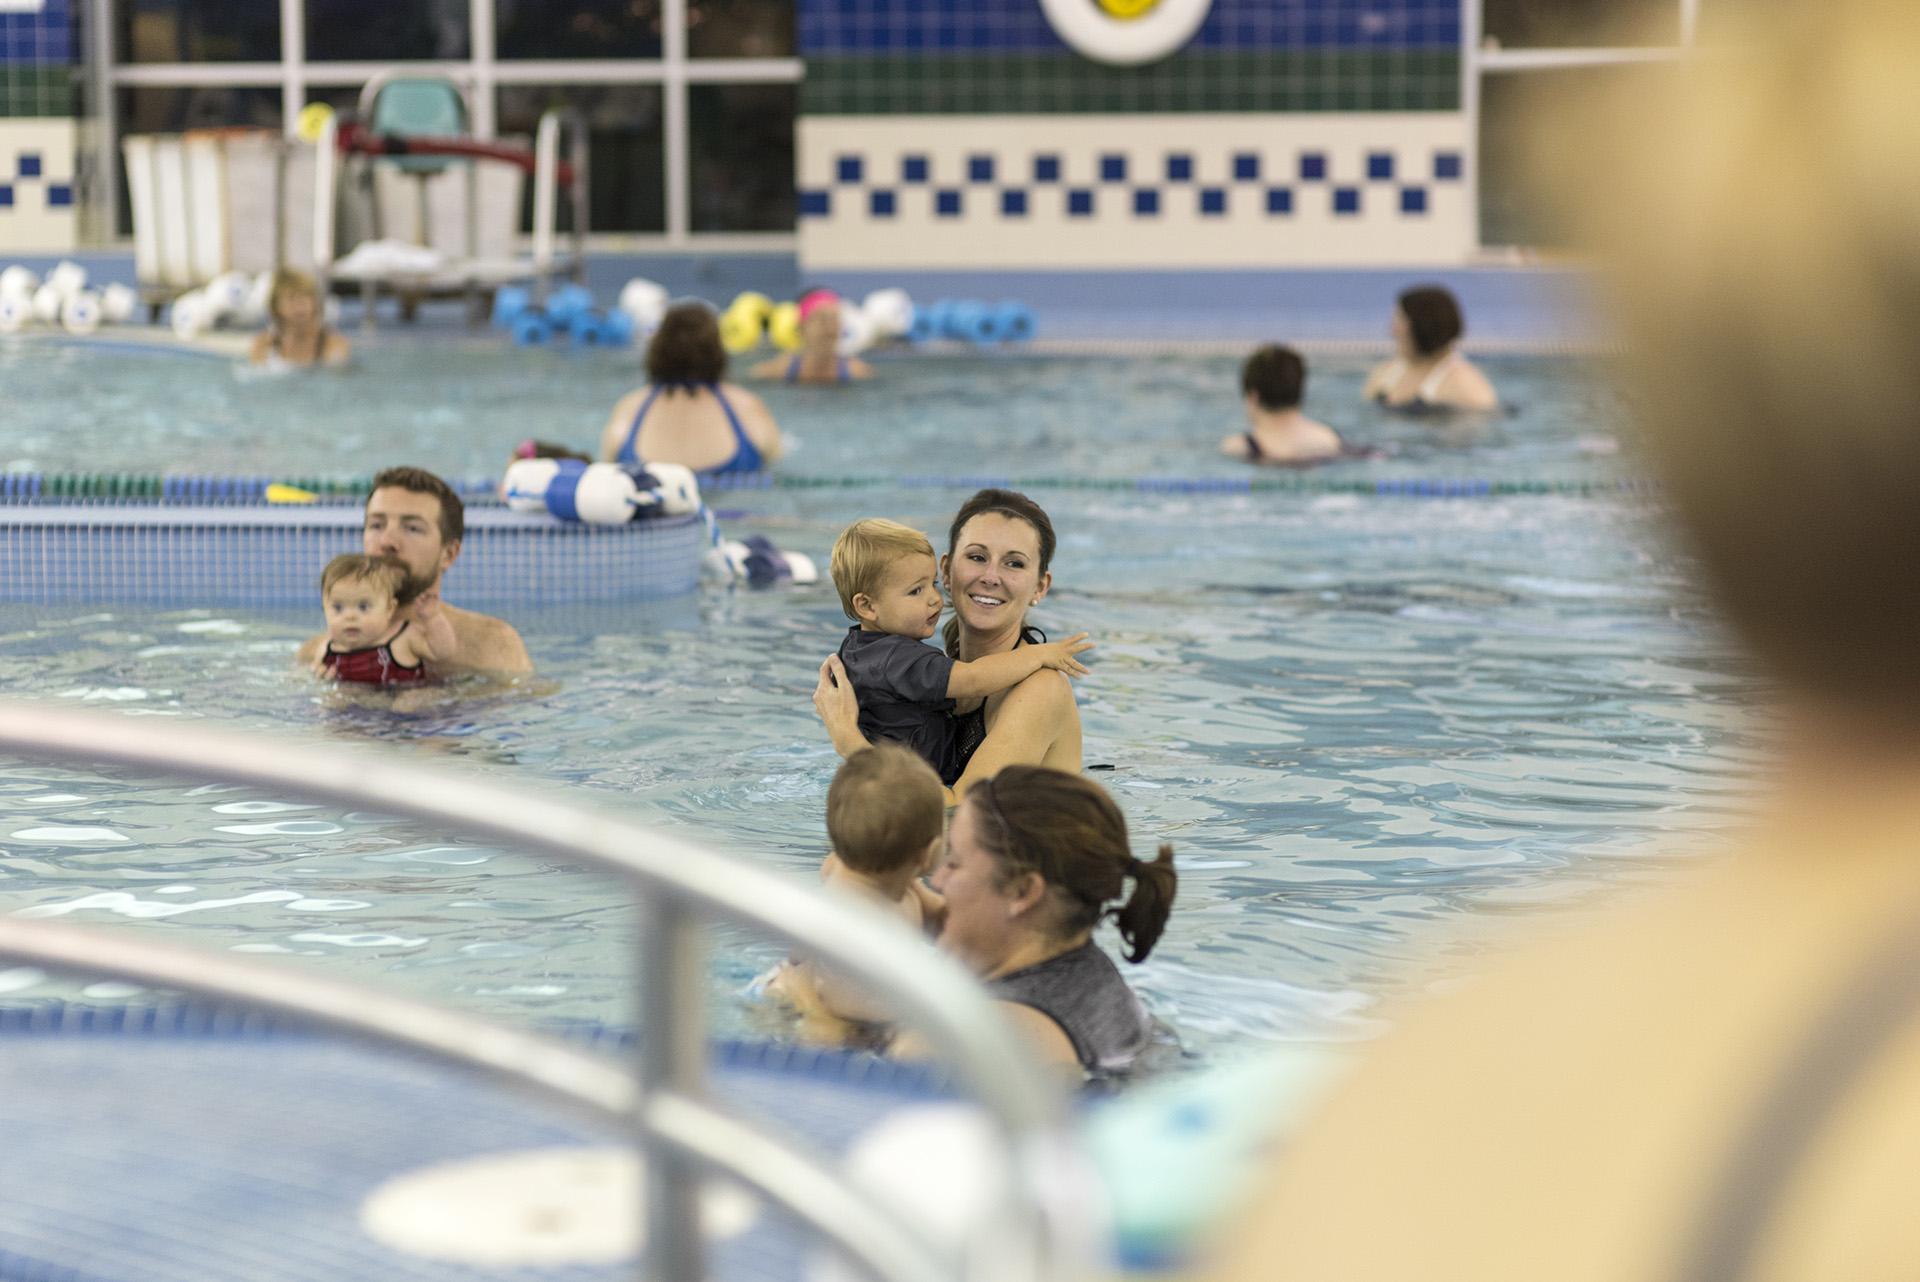 The pool is open to the public and offers a variety of classes.